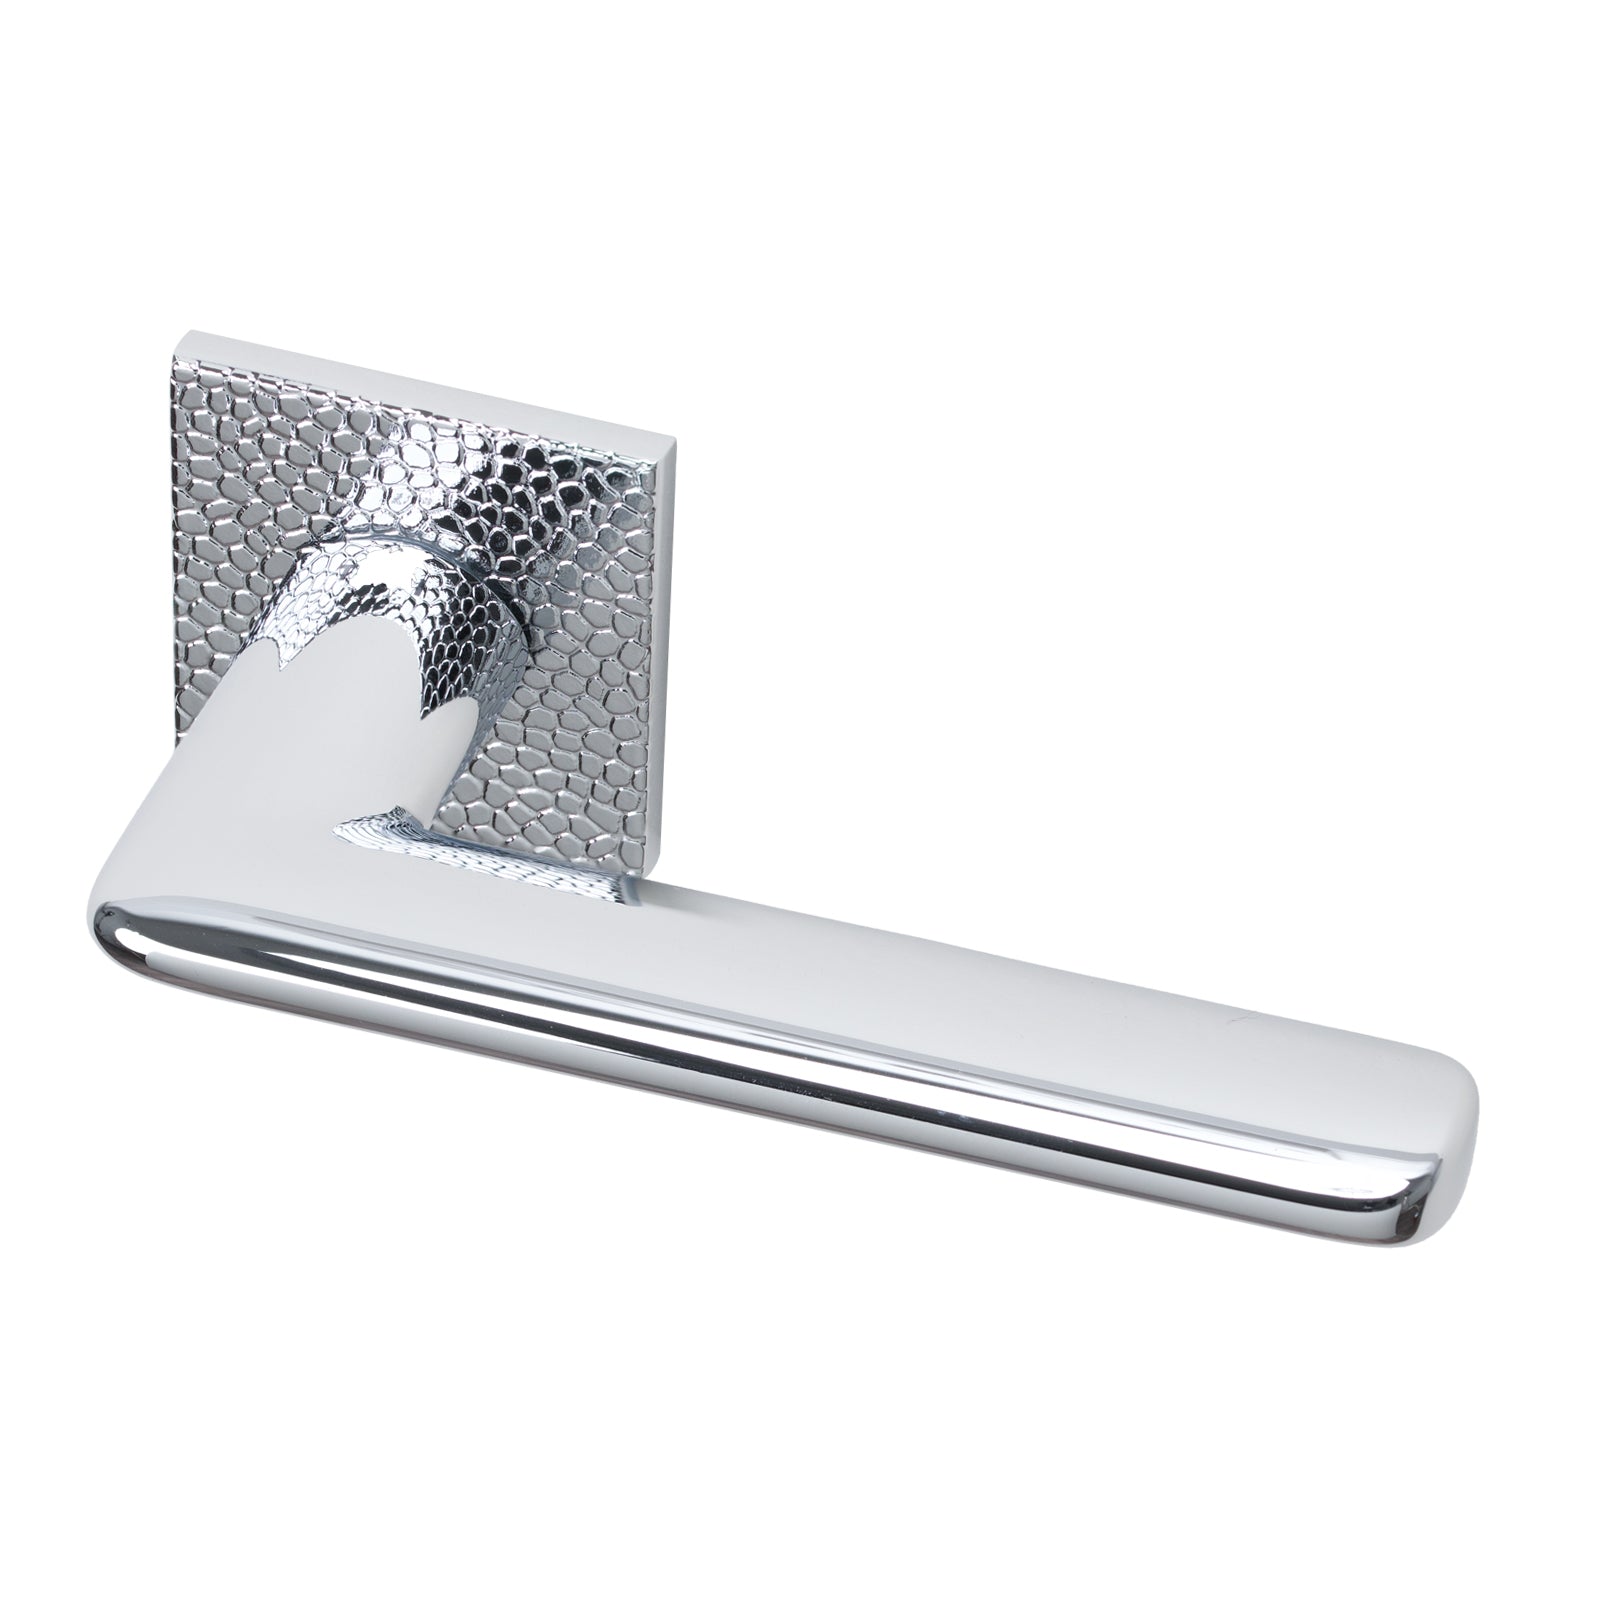 Tupai Edral lever on rose door handle with Pebbles texture design in Bright Chrome Finish SHOW